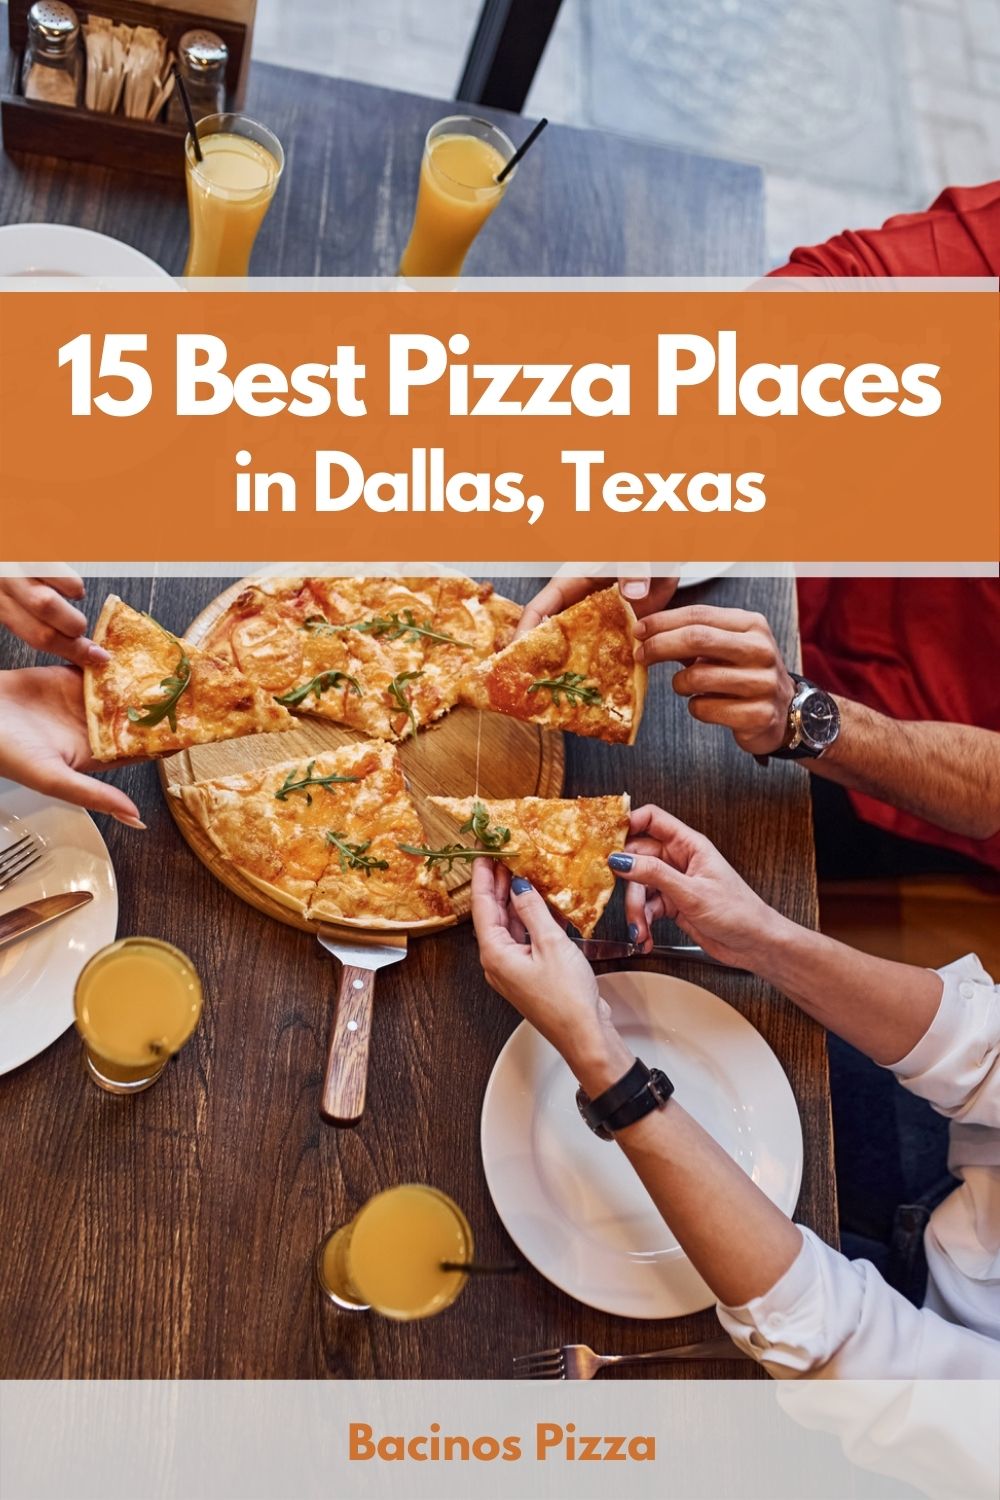 15 Best Pizza Places in Dallas, Texas pin